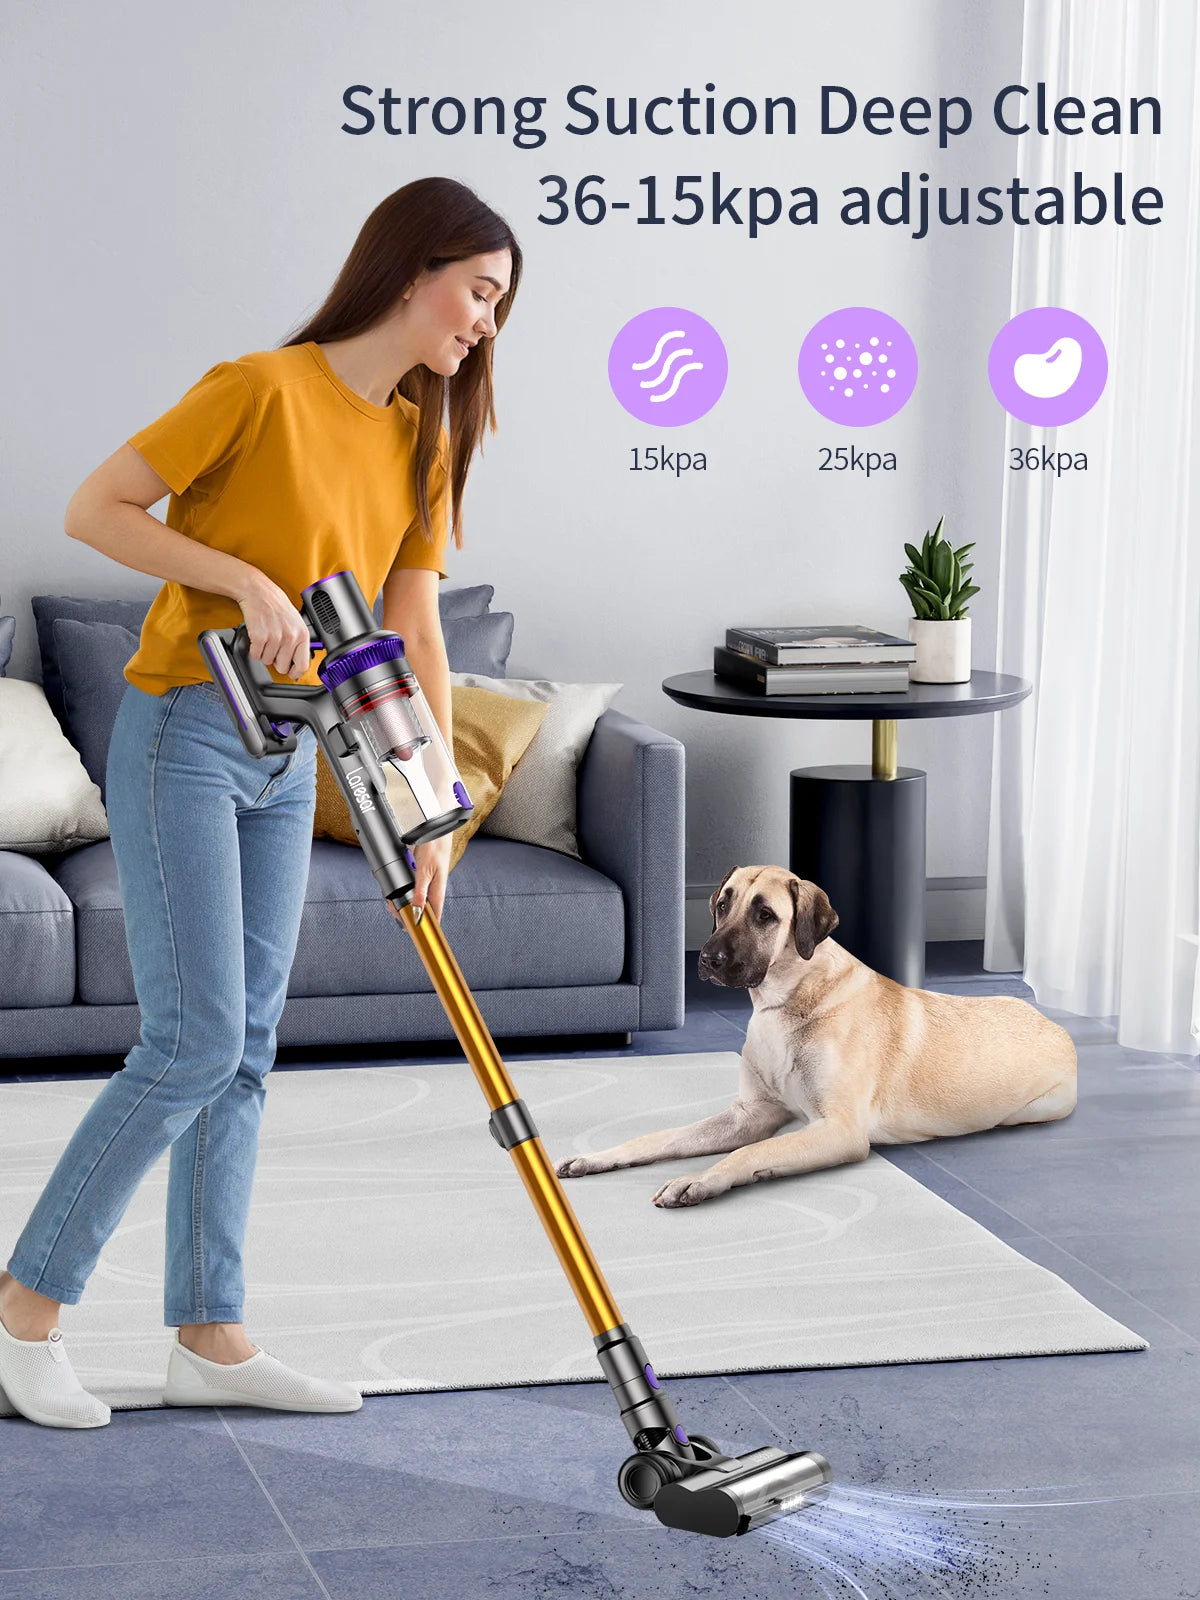 450W 36000Pa Suction Power Cordless Wireless Handheld Vacuum Cleaner Smart Home Appliance 1.5L Dust Cup 55Mins Runtimes